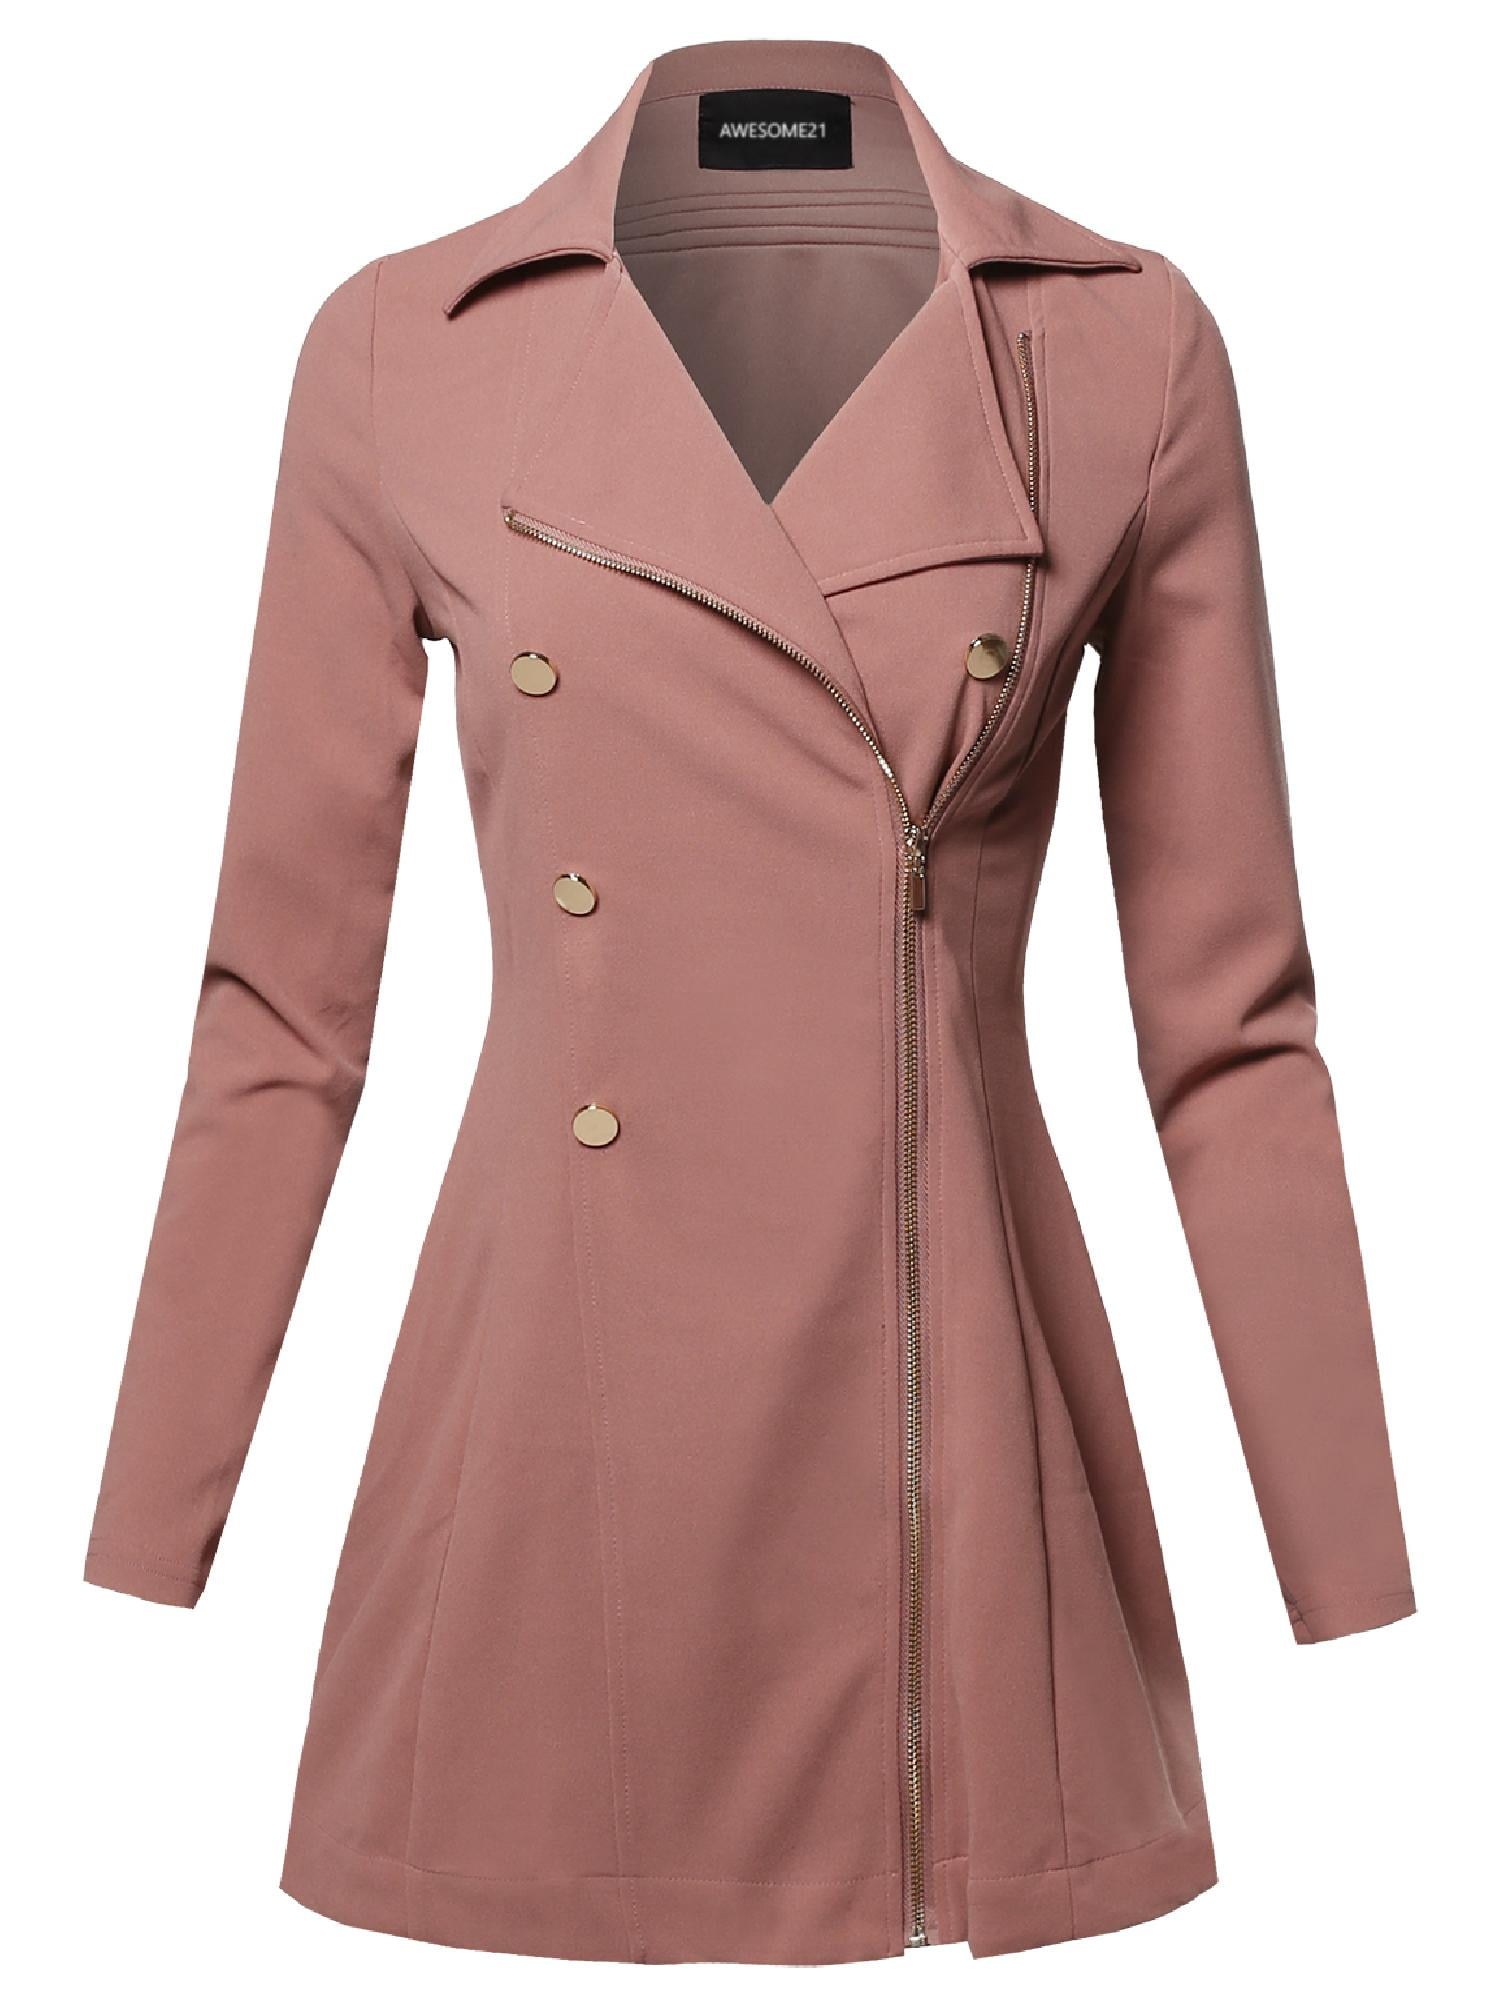 Bulges Womens Turn Down Collar Zip Up Long Trench Coat with Belt